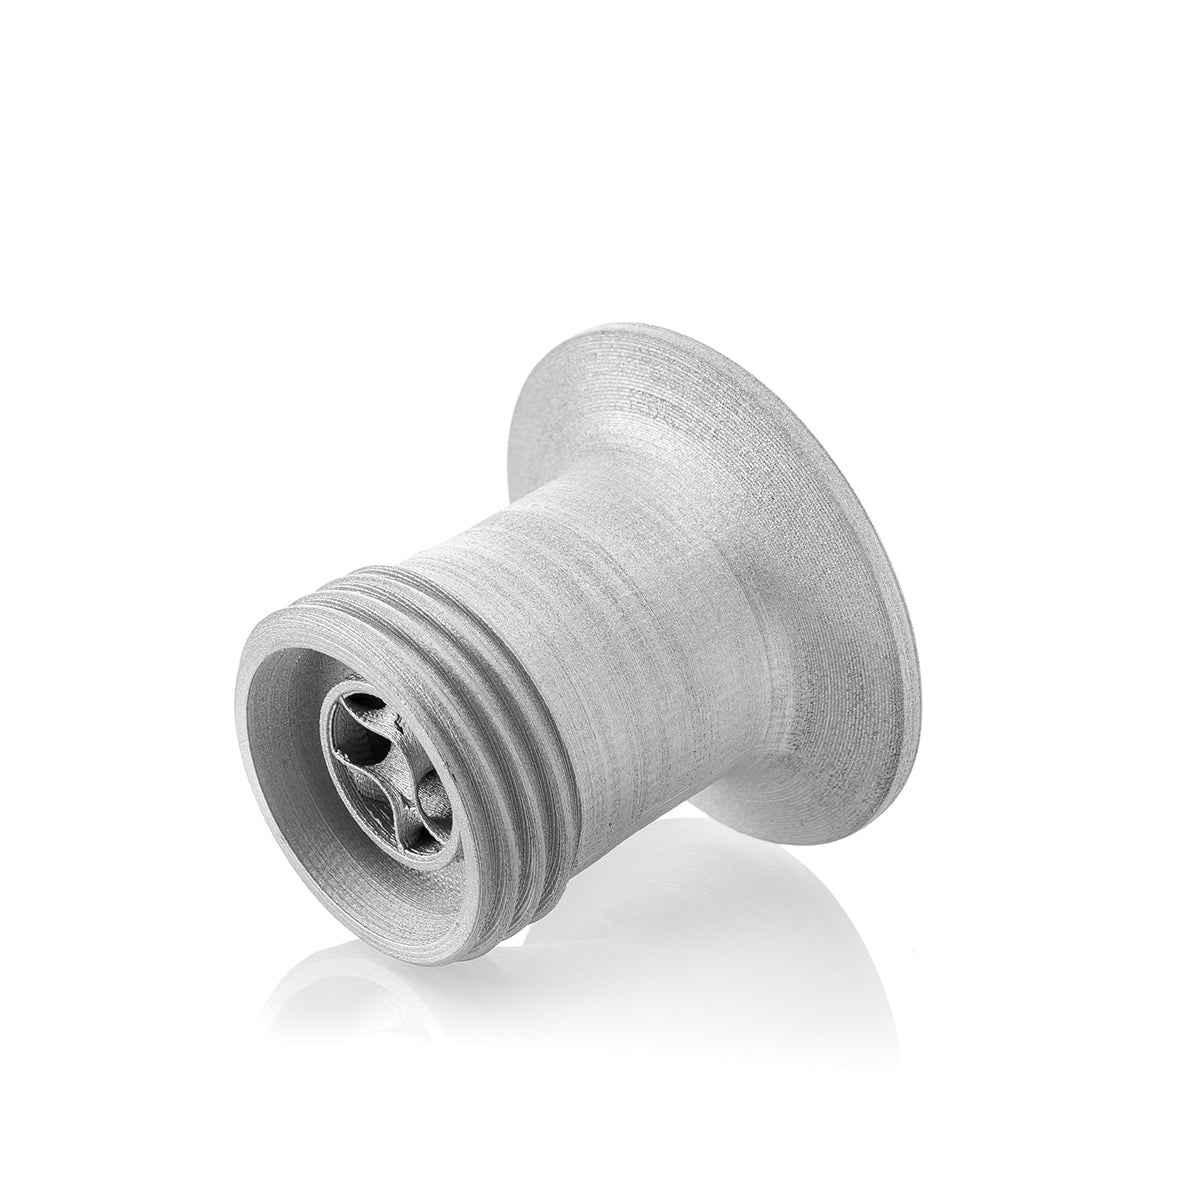 BASF Ultrafuse® Stainless Steel 17-4